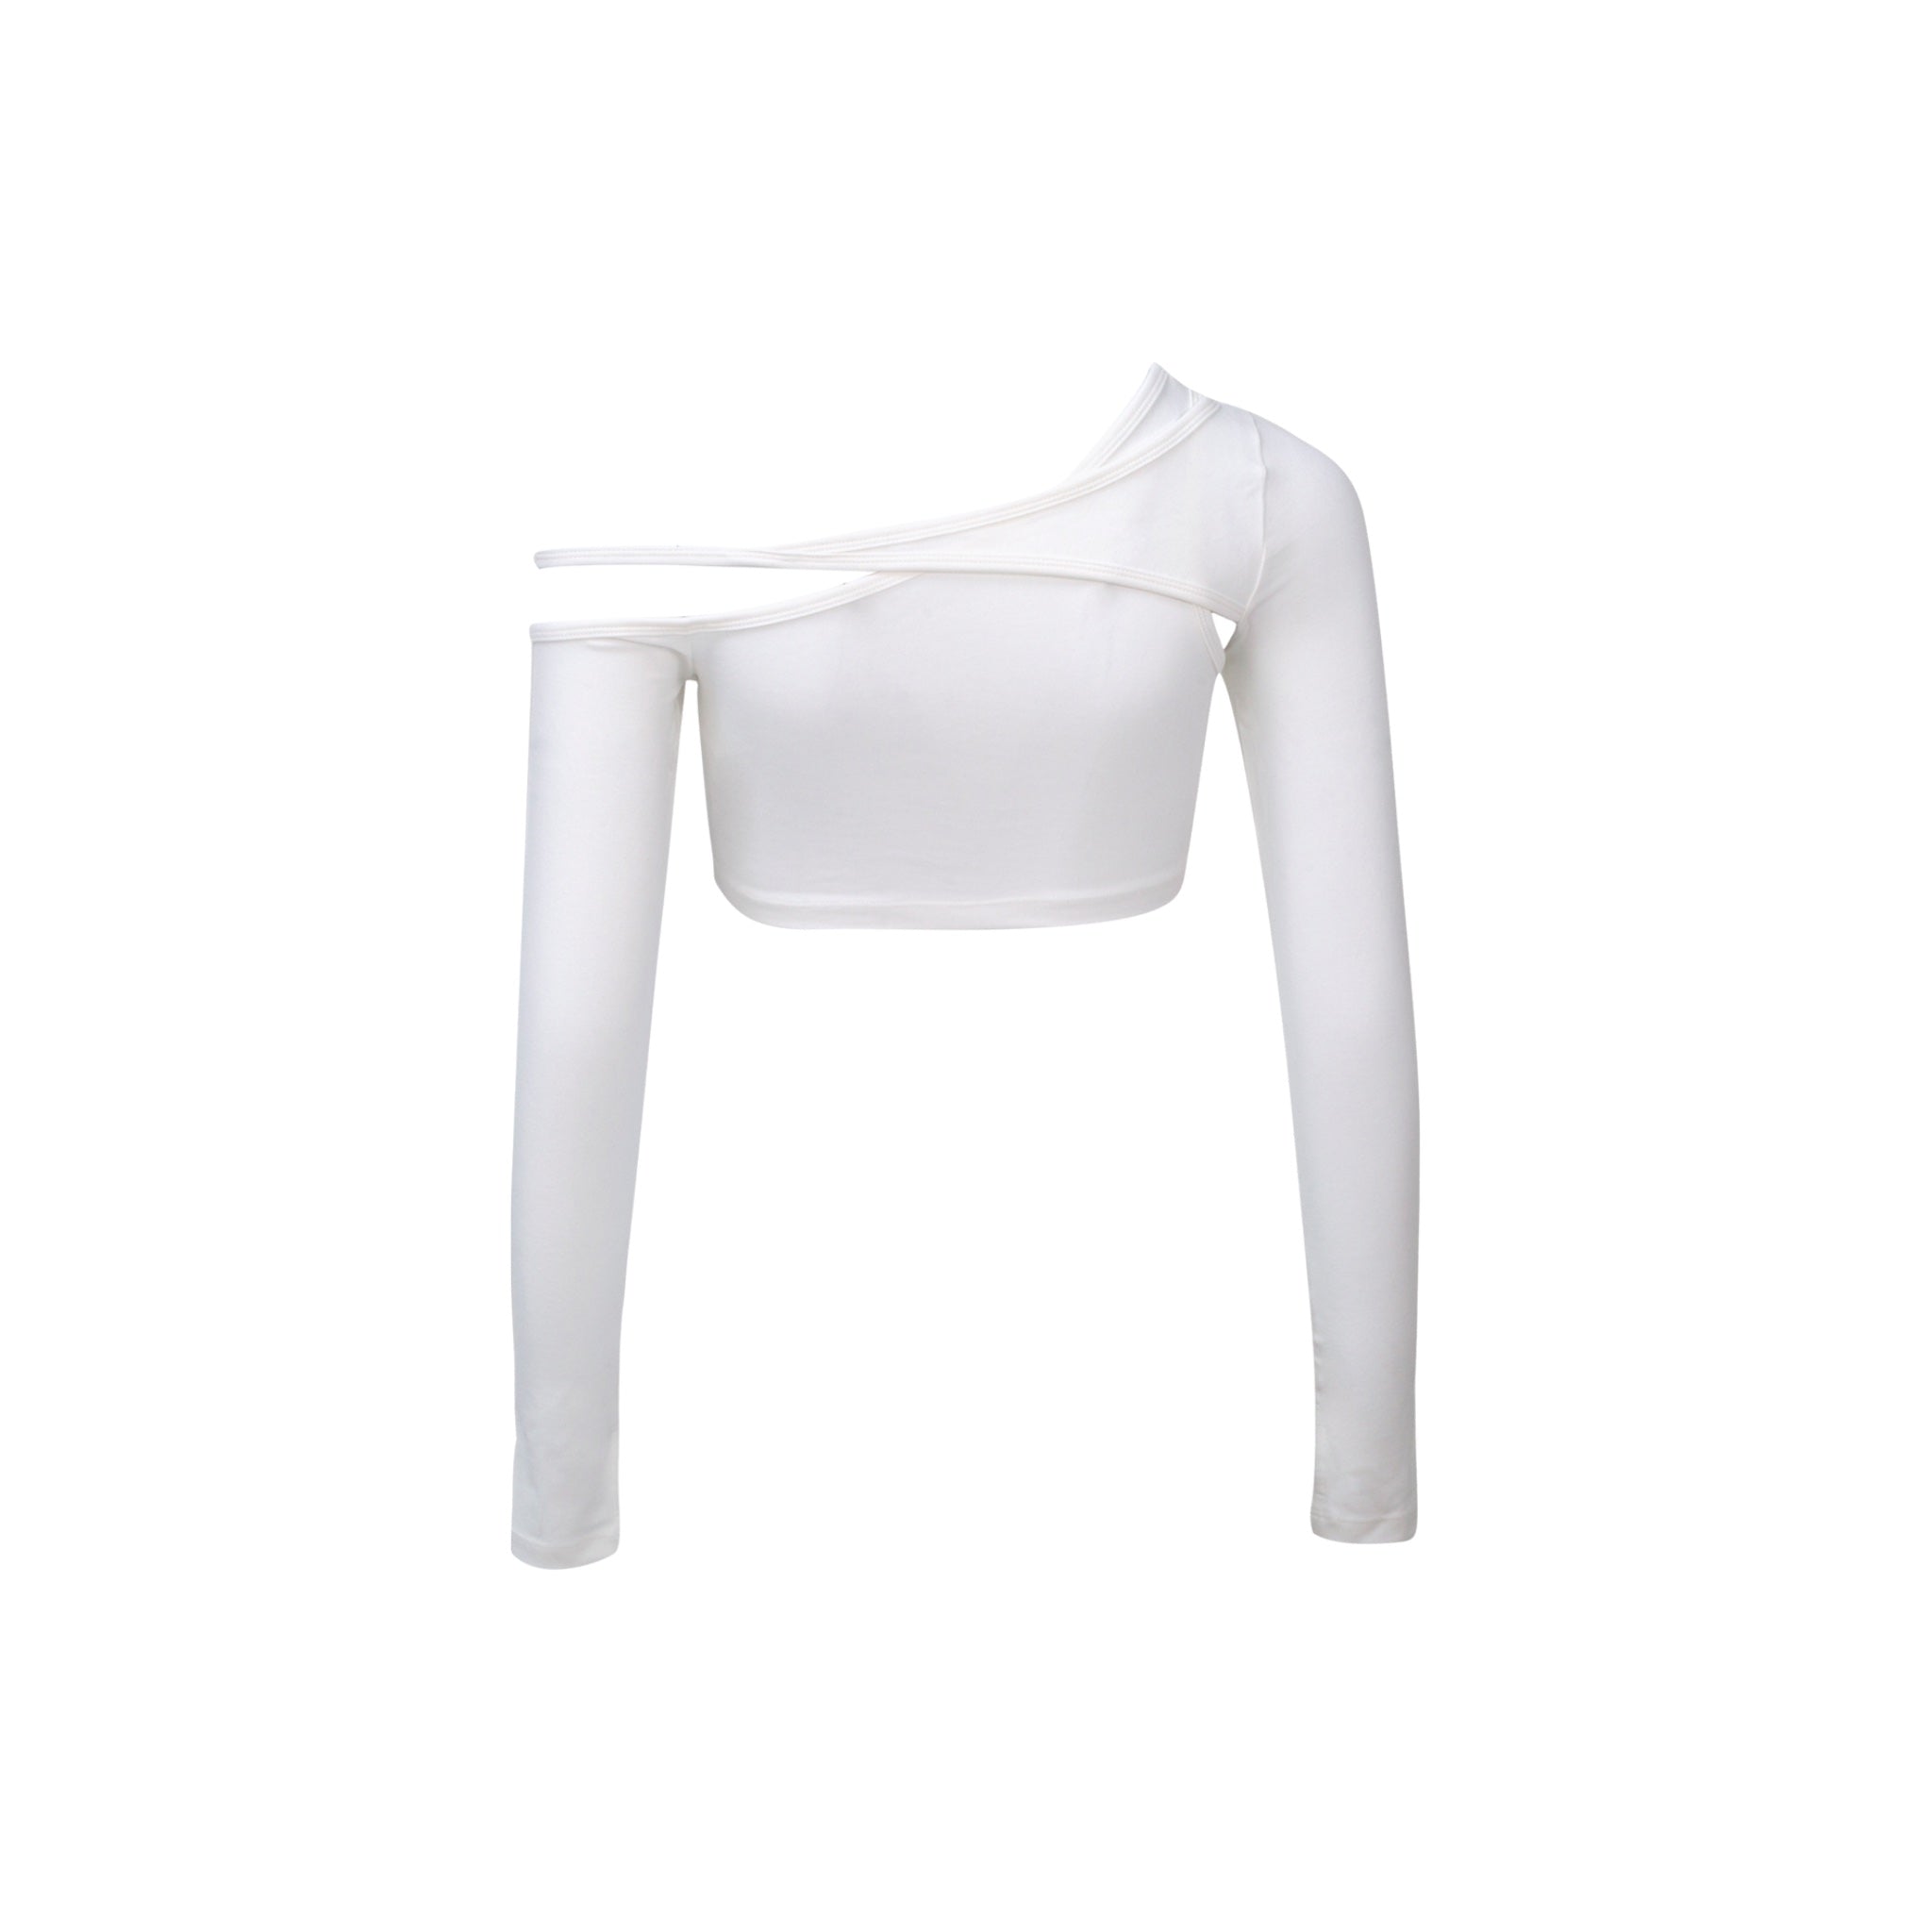 ANN ANDELMAN White Atrapless Deconstructed Top | MADA IN CHINA